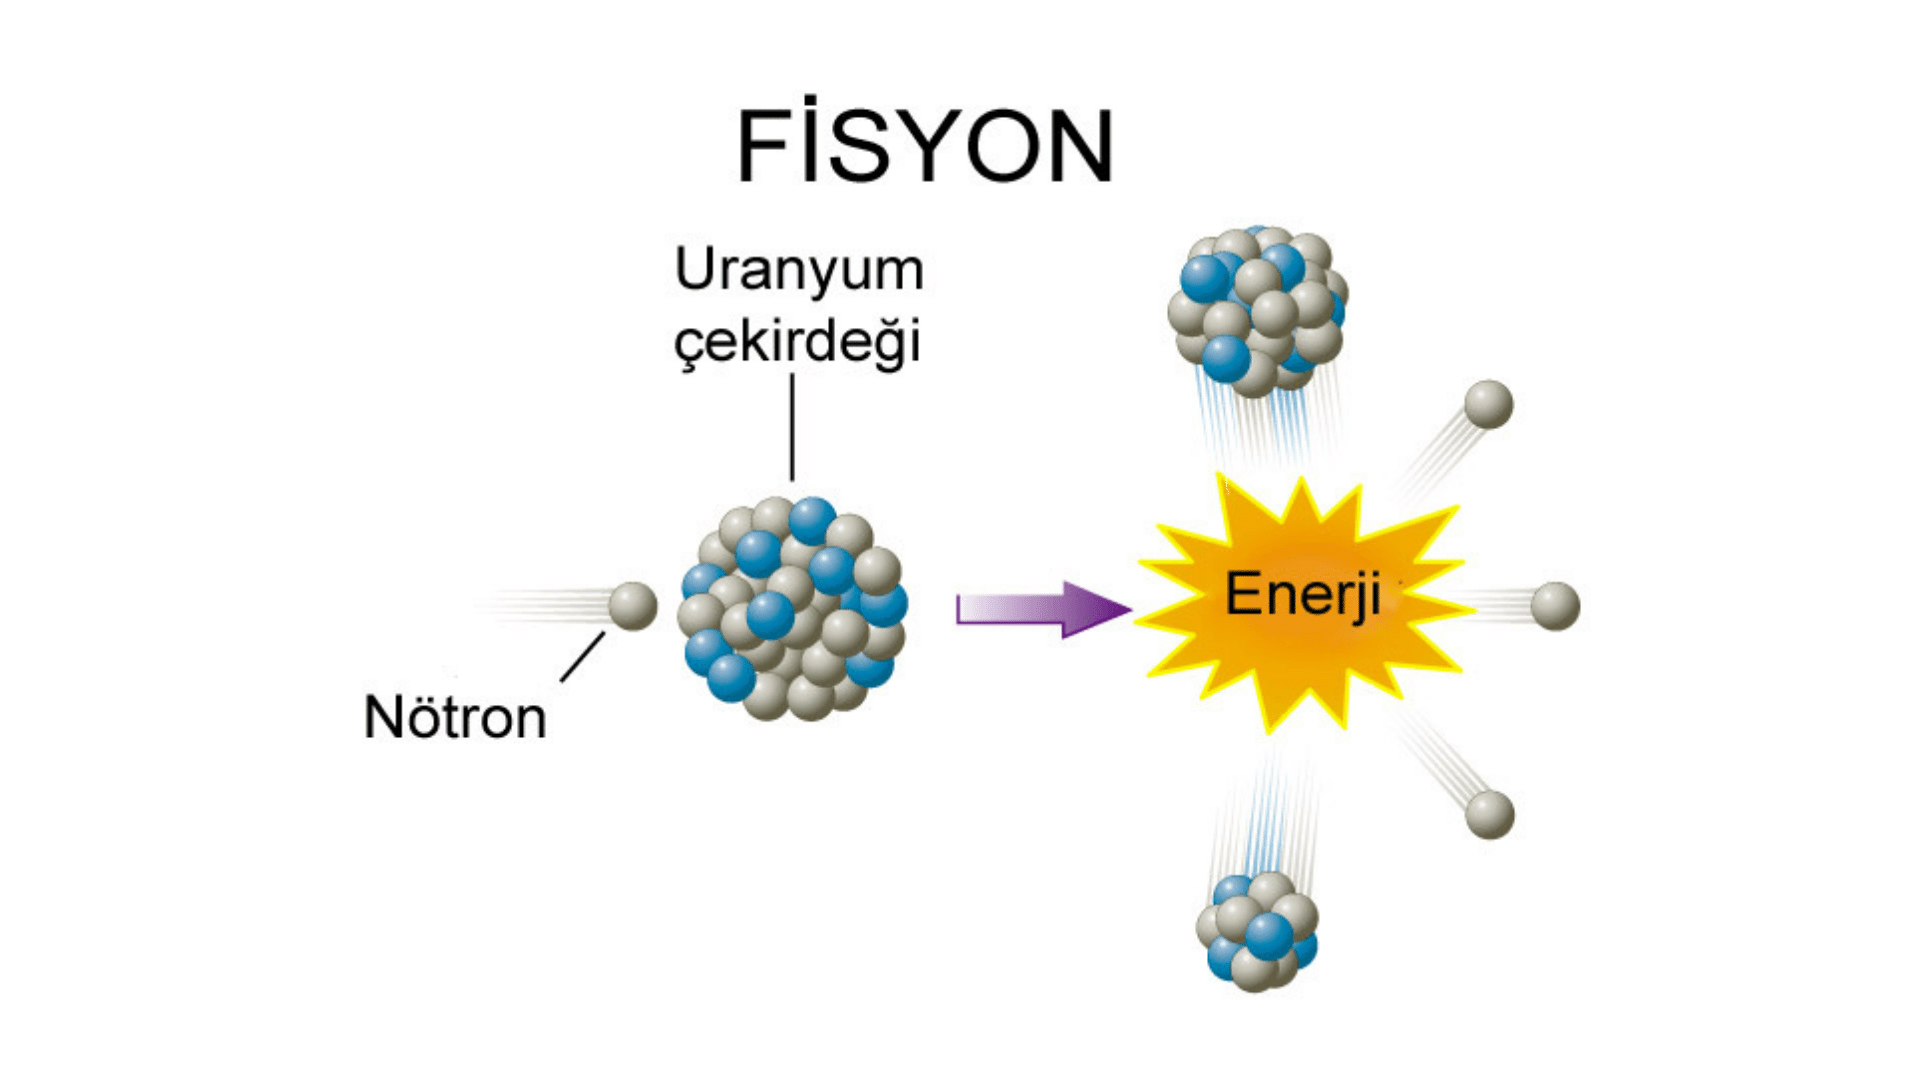 Schematic of the fission process